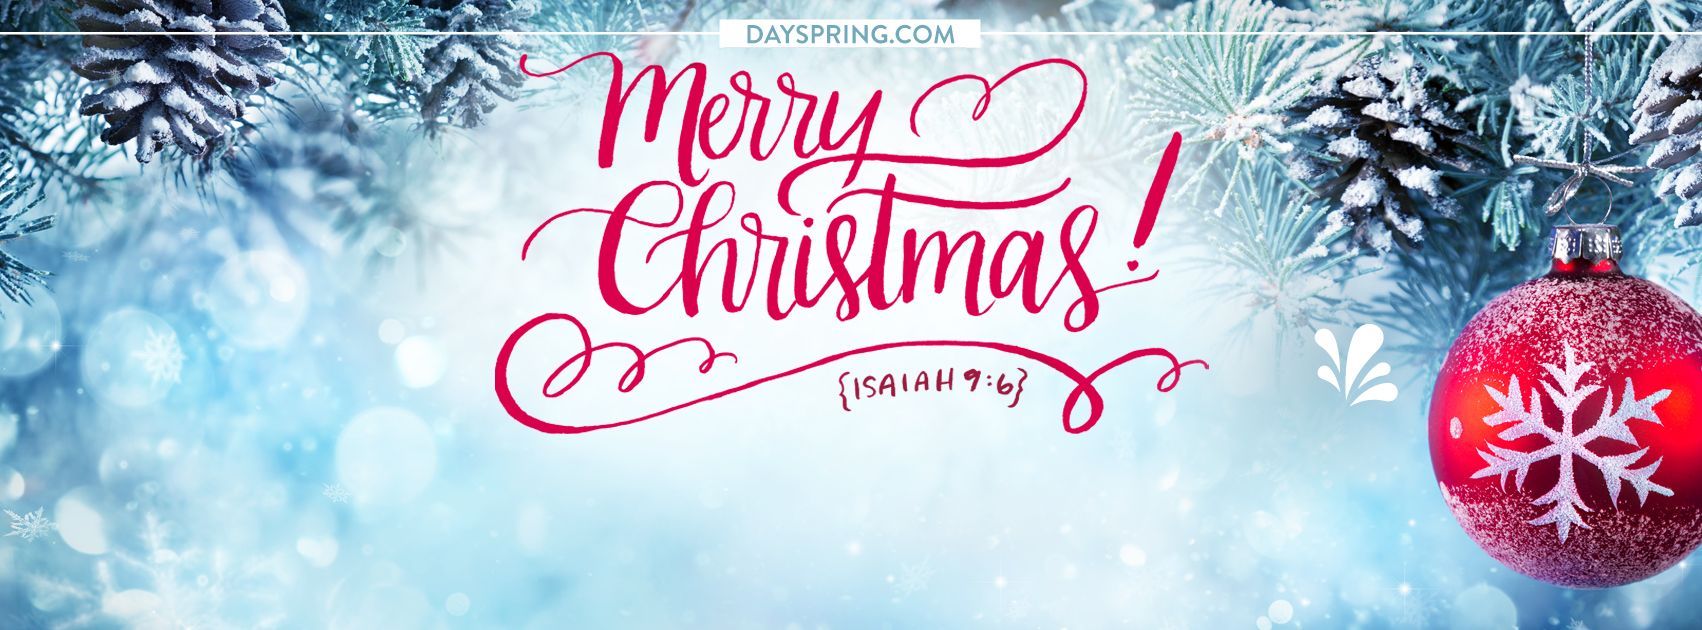 Facebook Cover Photo to Spice Up Your Profile for Christmas. DaySpring. Christmas facebook cover, Facebook christmas cover photo, Christmas cover photo